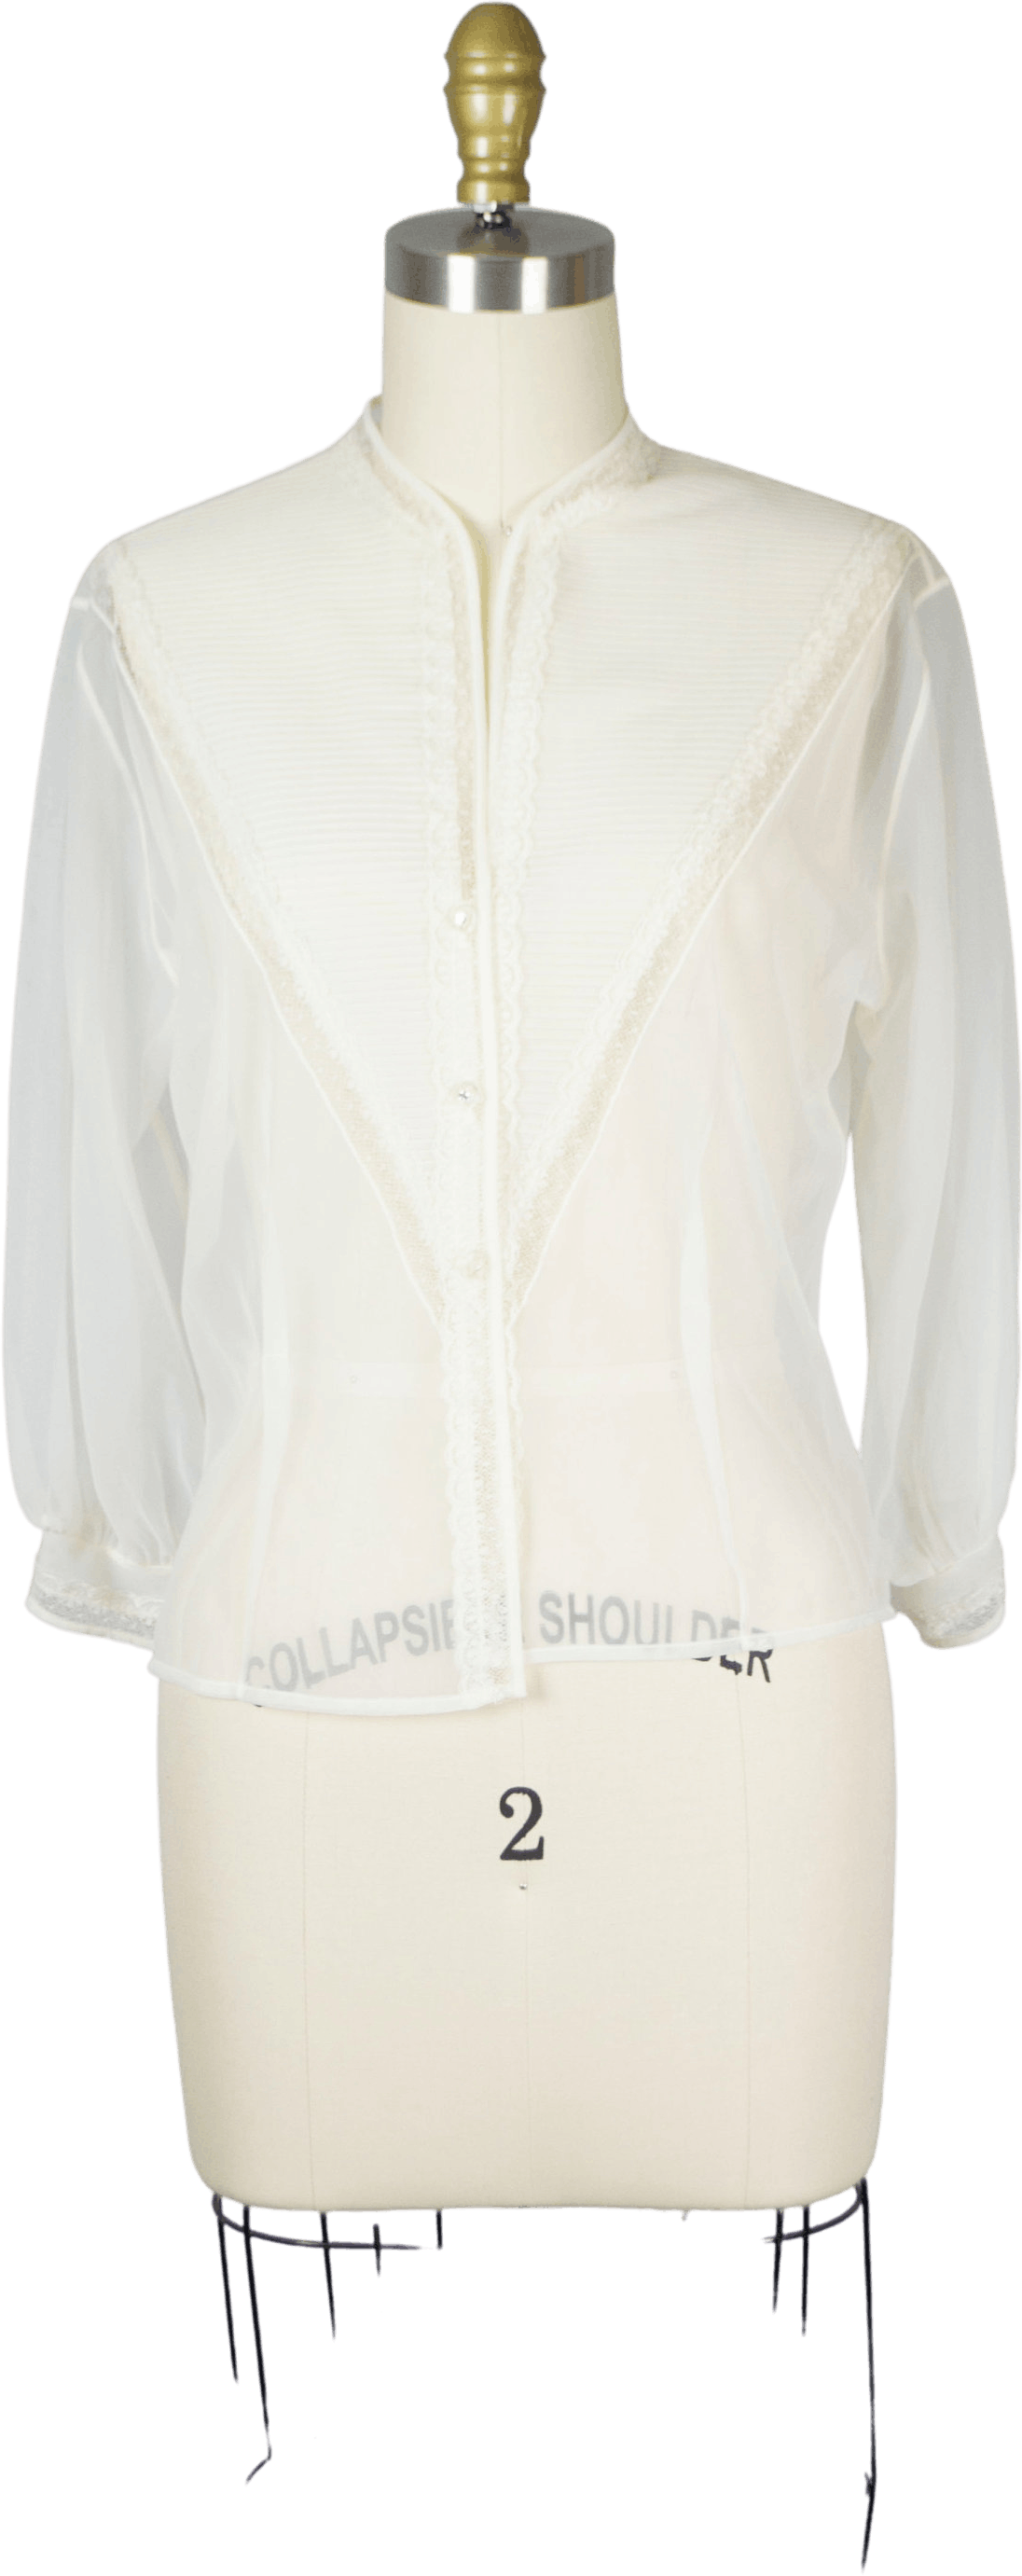 Vintage 50's/60's Sheer White Blouse with Collar by Rhoda Lee | Shop ...